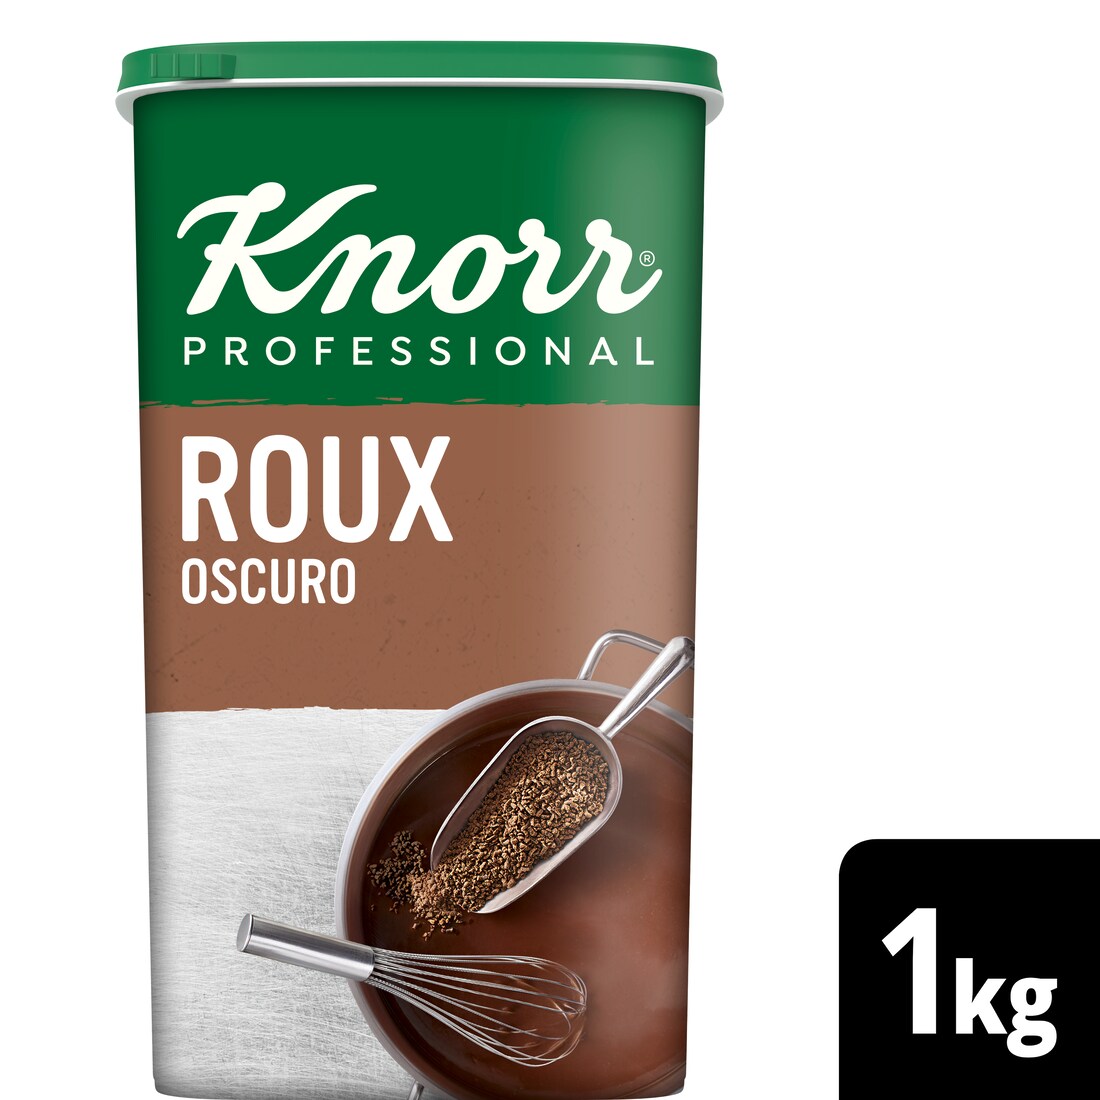 Knorr Roux Espesante Oscuro bote 1kg